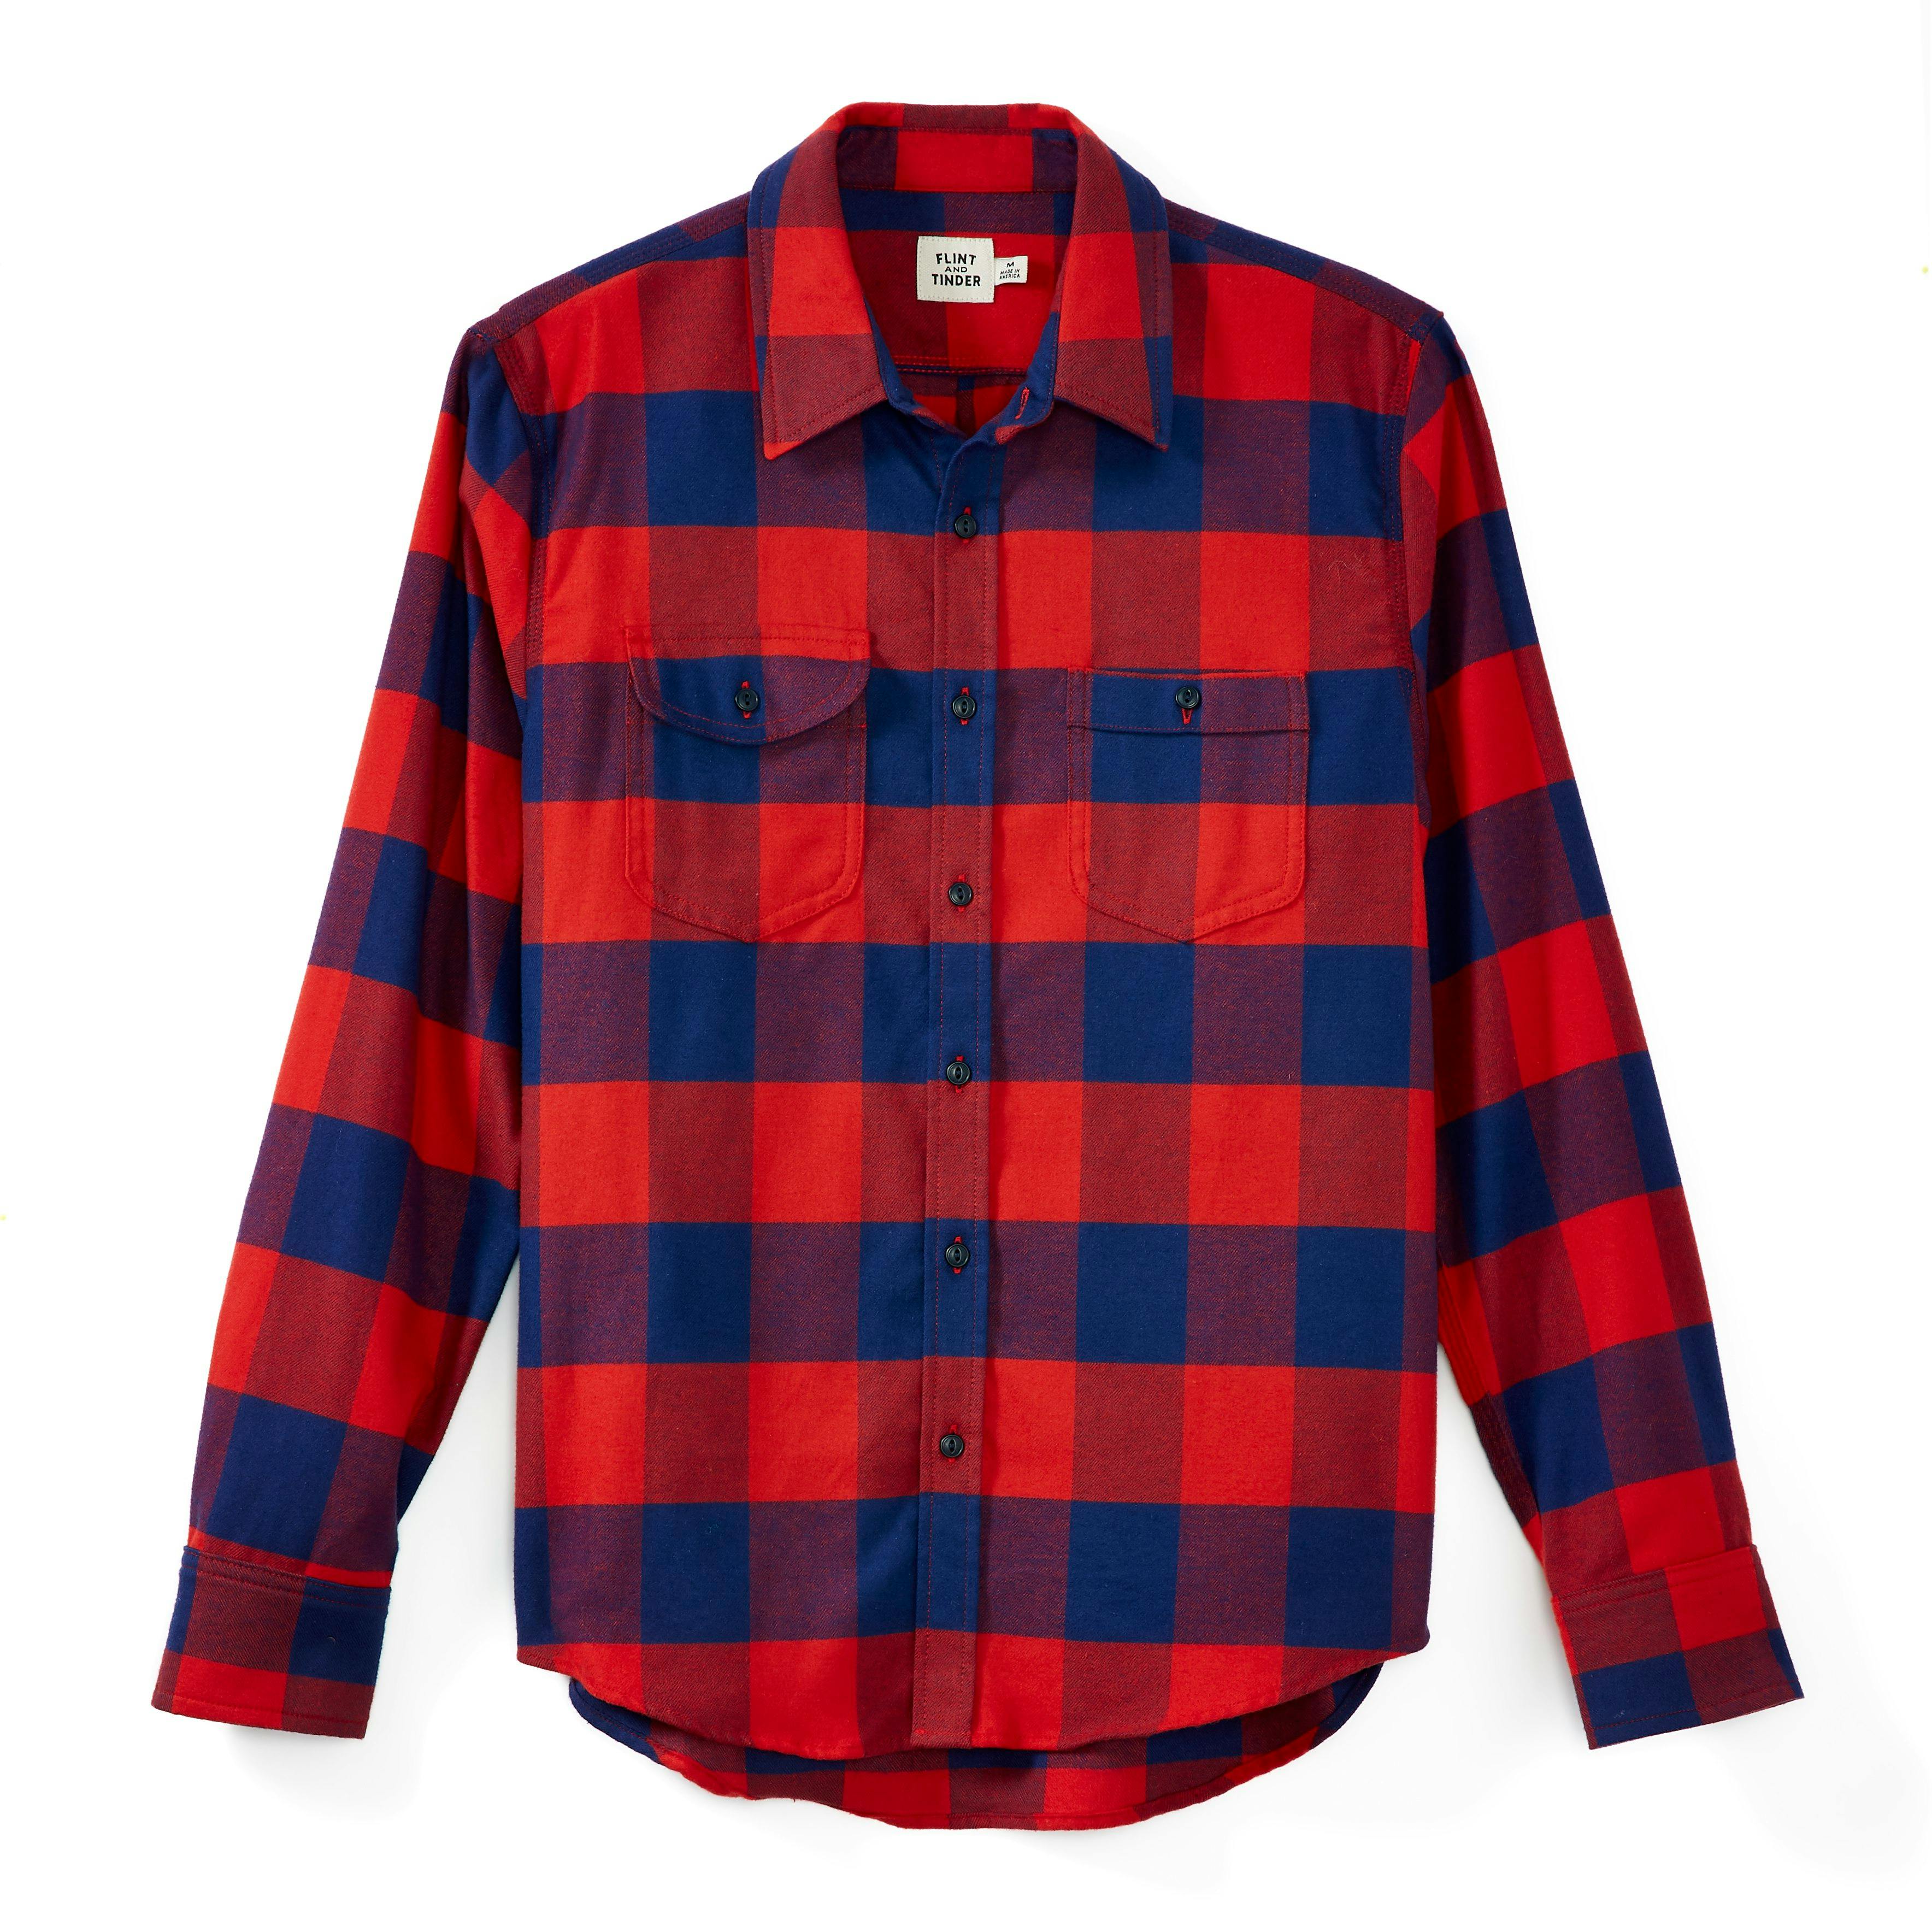 American Made Flannel